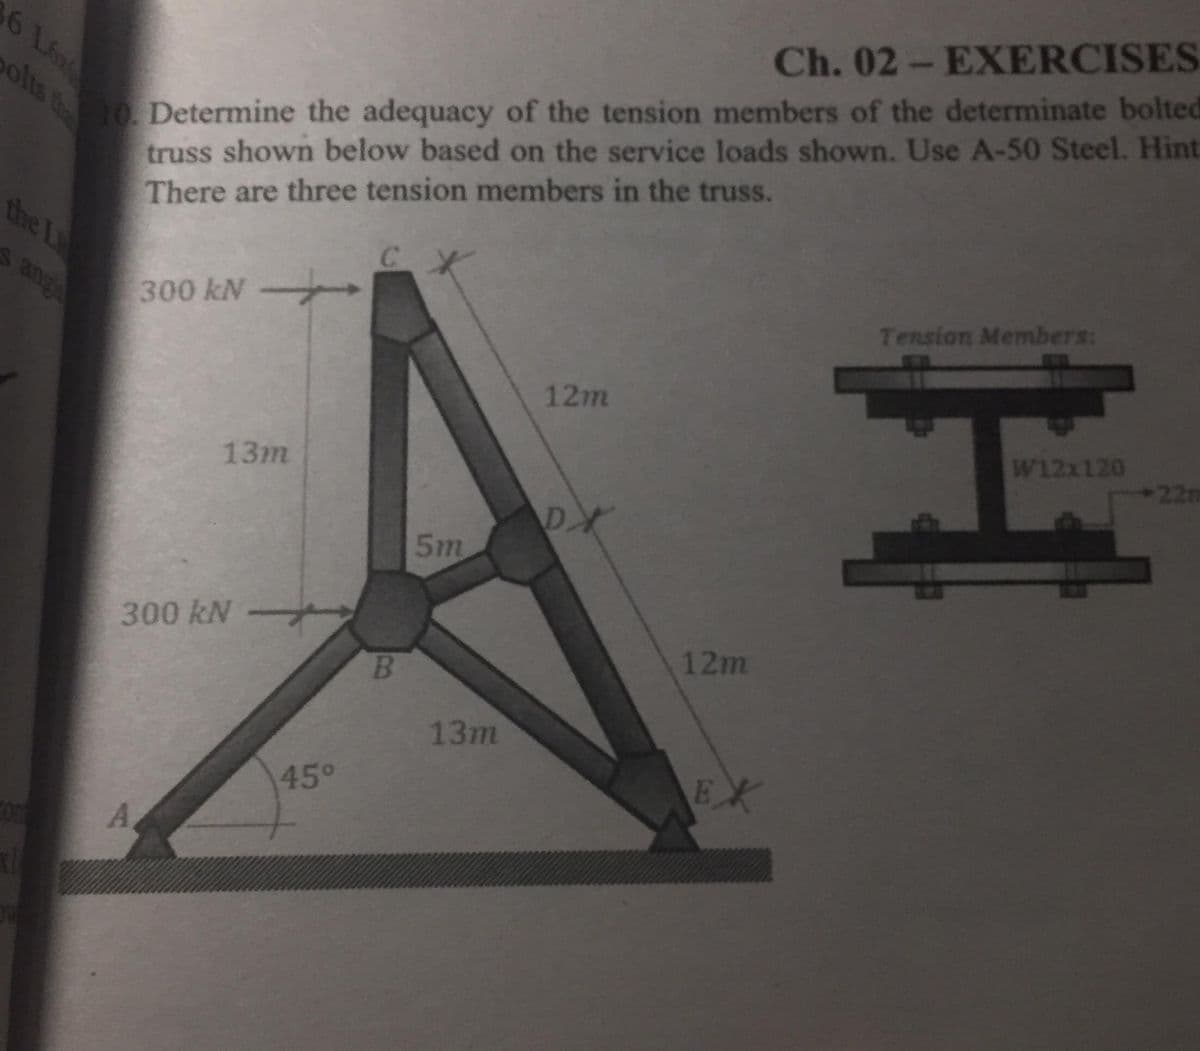 Ch. 02- EXERCISES
10Determine the adequacy of the tension members of the determinate bolted
truss shown below based on the service loads shown. Use A-50 Steel. Hint
There are three tension members in the truss.
6 Lo
olts the
the L
Tension Members:
S ang
300 kN
12m
W12x120
22m
13m
DX
5m
300 kN -
12m
13m
EX
45°
Com
A
.
